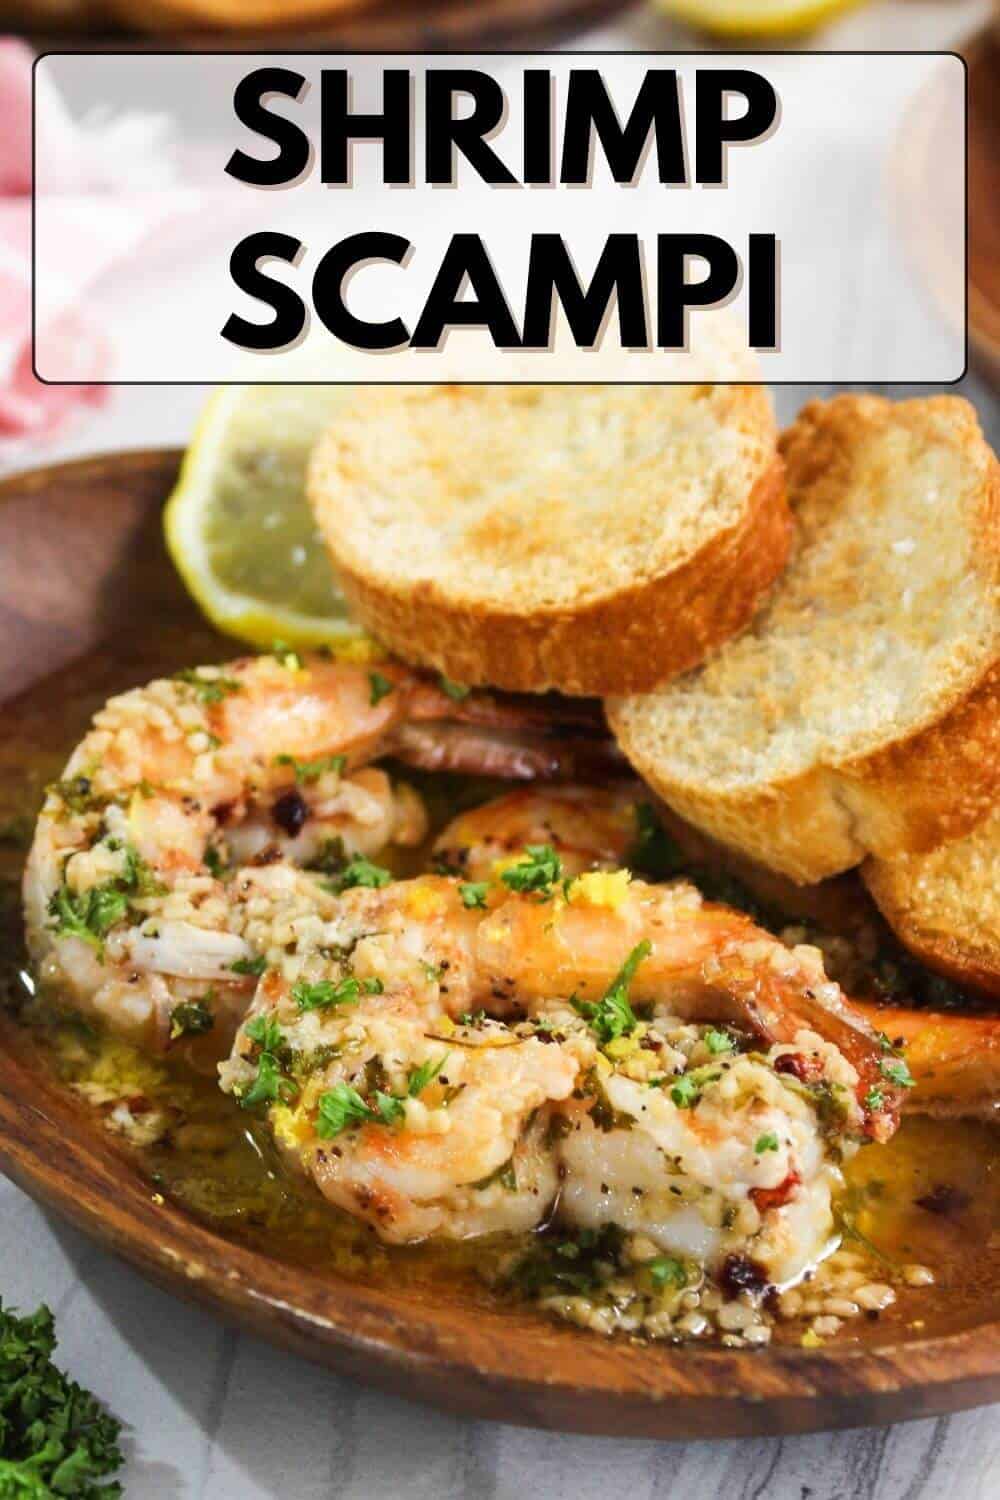 Shrimp scampi on a plate with bread and lemon.